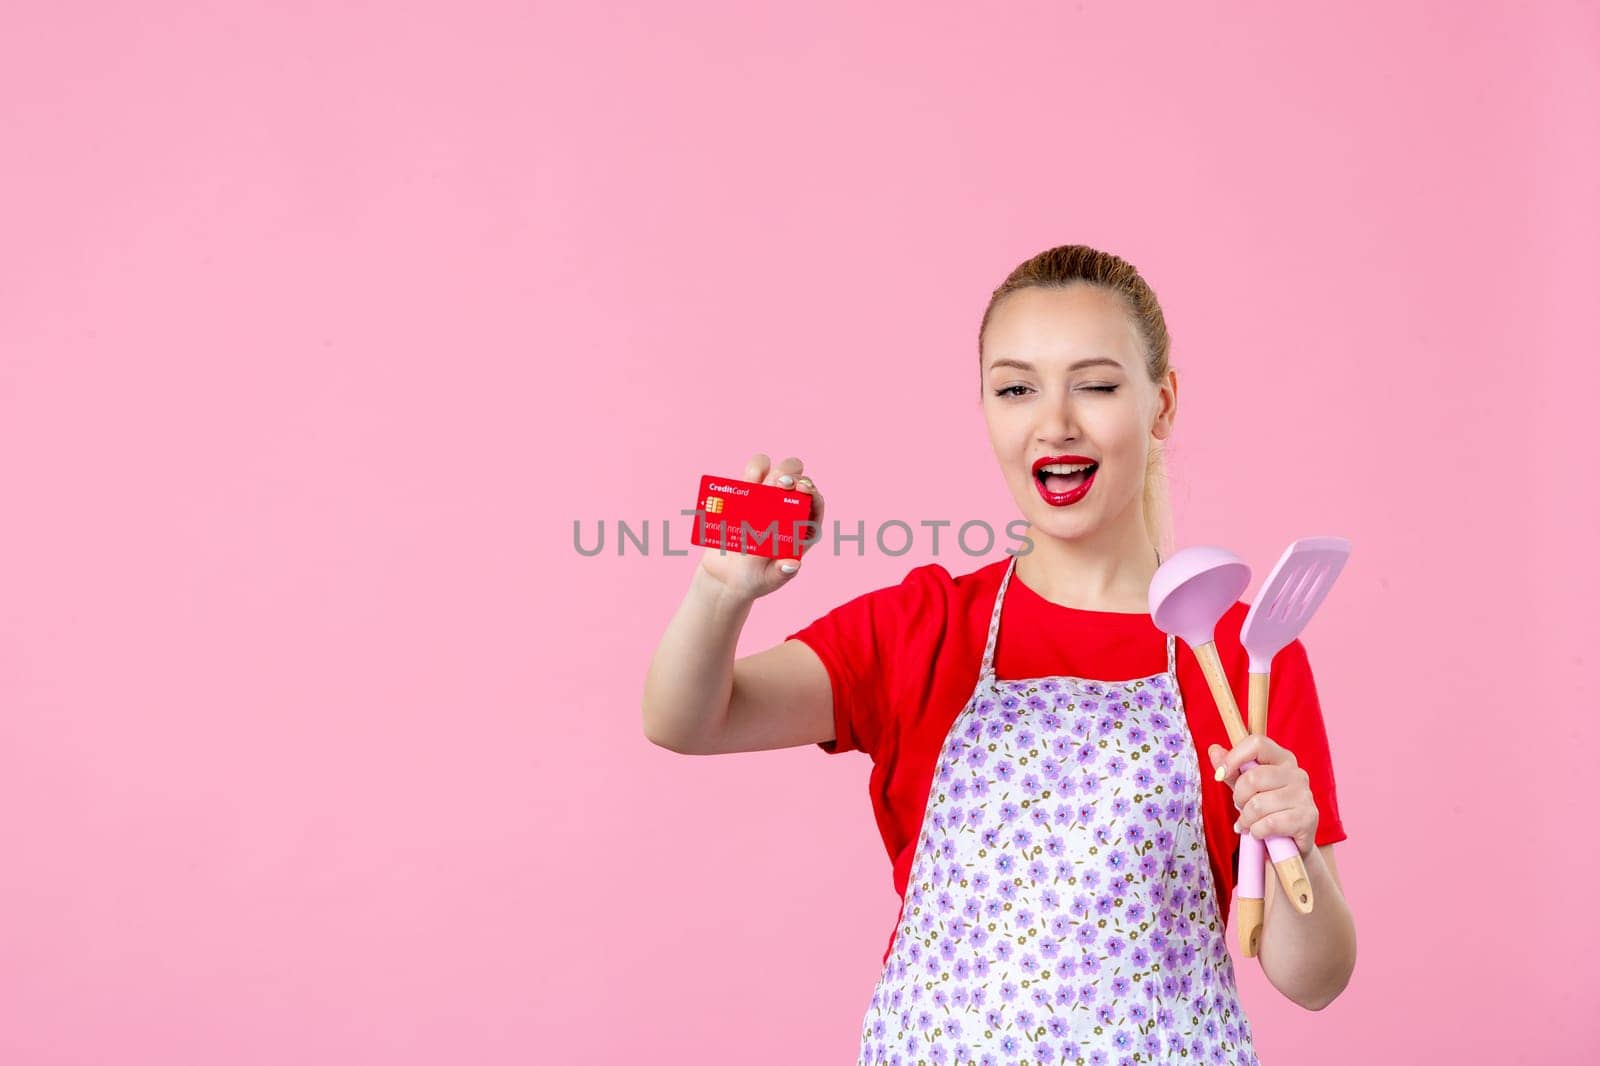 front view young housewife in cape holding spoons and red bank card on pink background profession money occupation duty uniform job cutlery worker horizontal wife